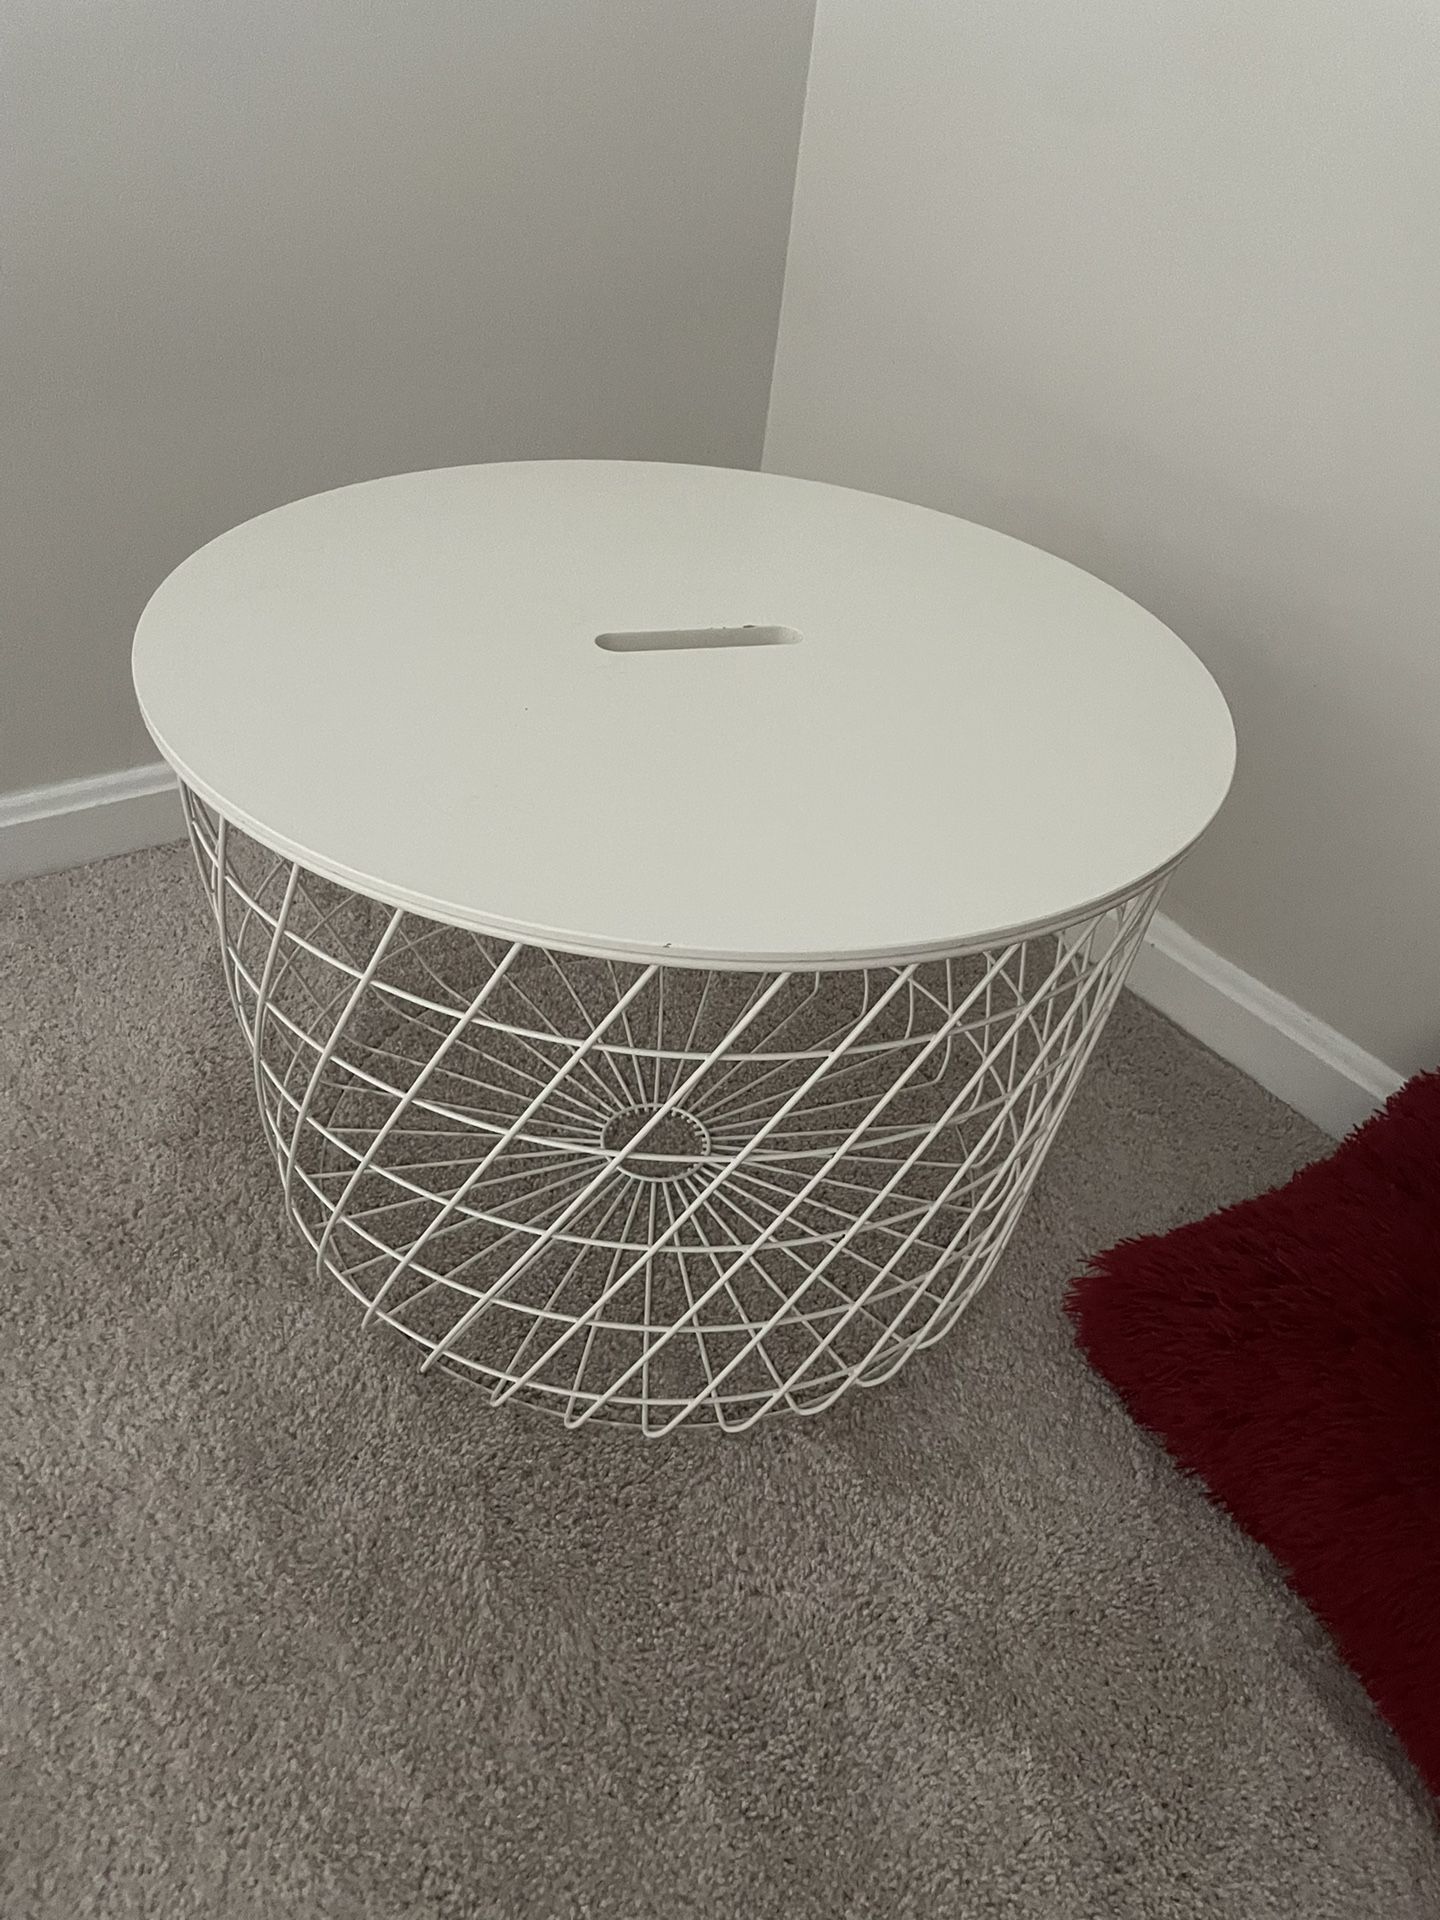 Table With Basket